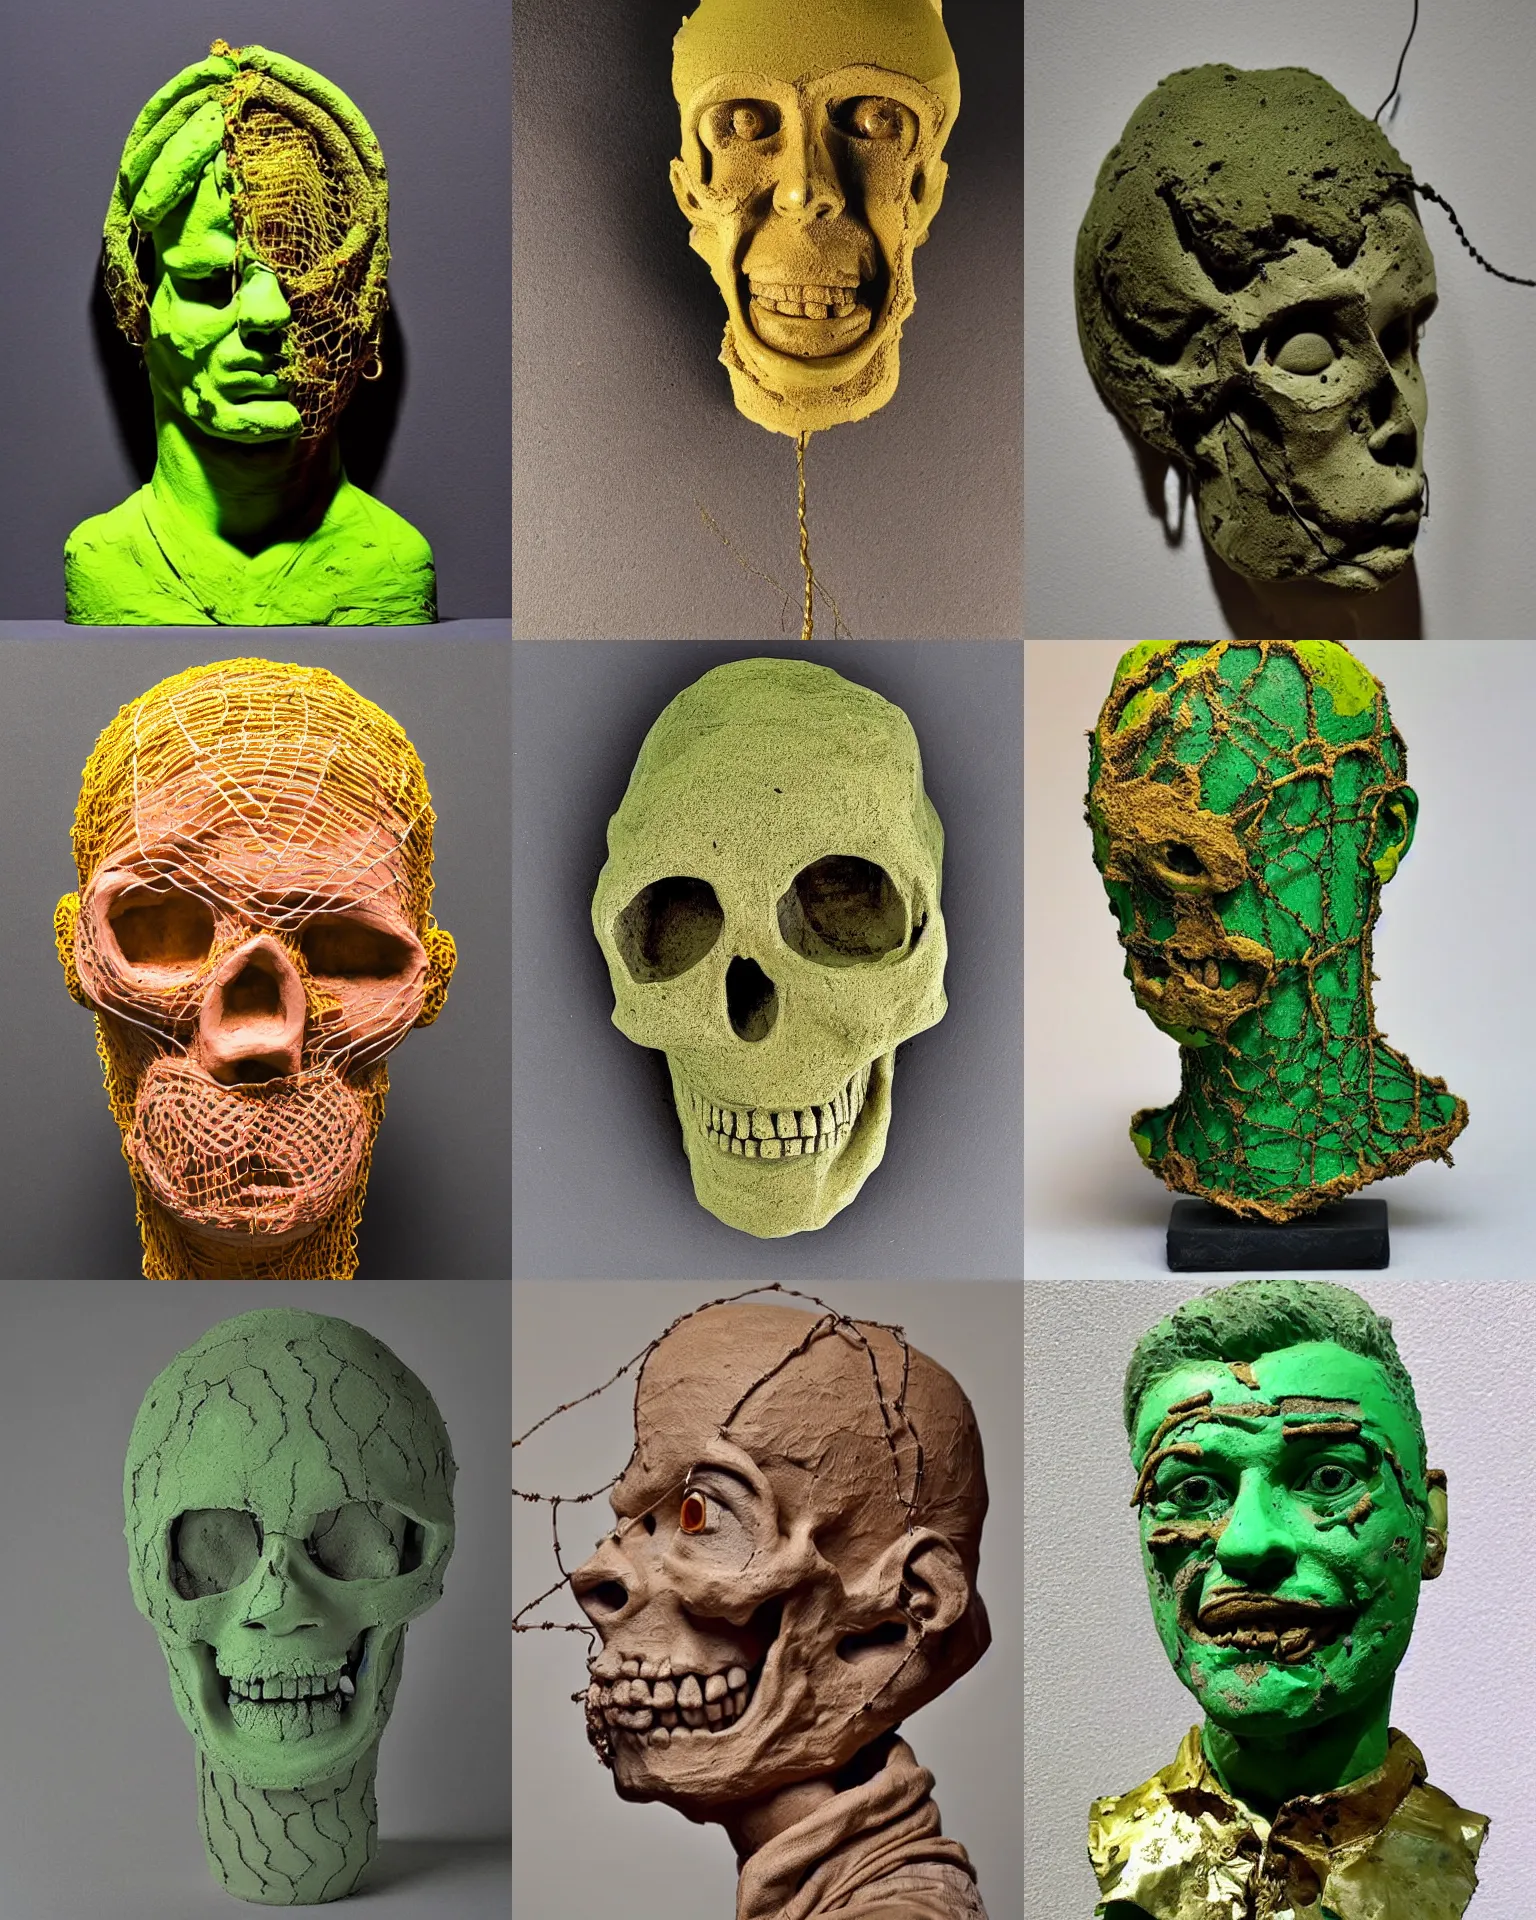 Prompt: clay sculpture. portrait of a man with a hollow head. instead of a skull, there is a loose wire mesh, with gold liquid spilling out. wire mesh skull with gaps. painted clay sculpture. neon green or pink or yellow colored background, intense lighting and shadows. astonishing detail